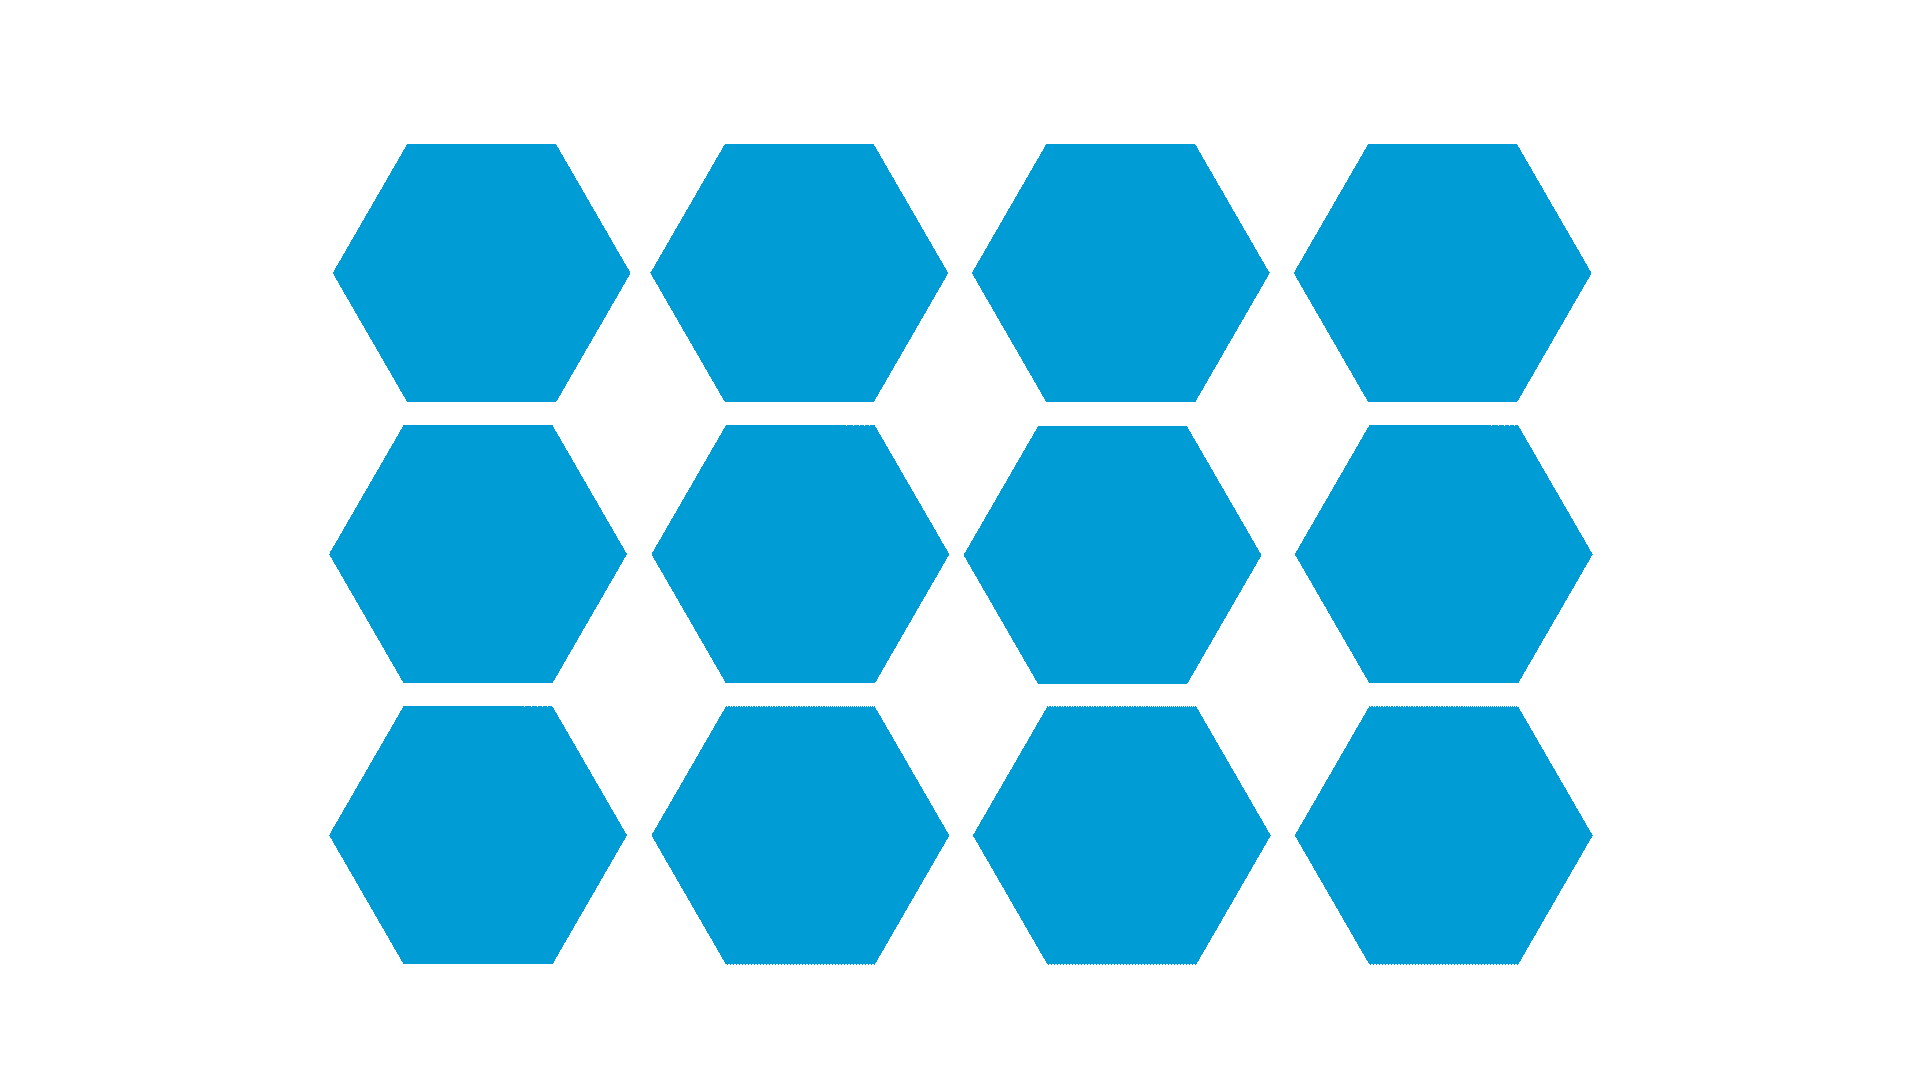 12 blue hexagons are aligned in rows of 4. One of the hexagons in the second row transforms into an orange circle as the animation progresses.